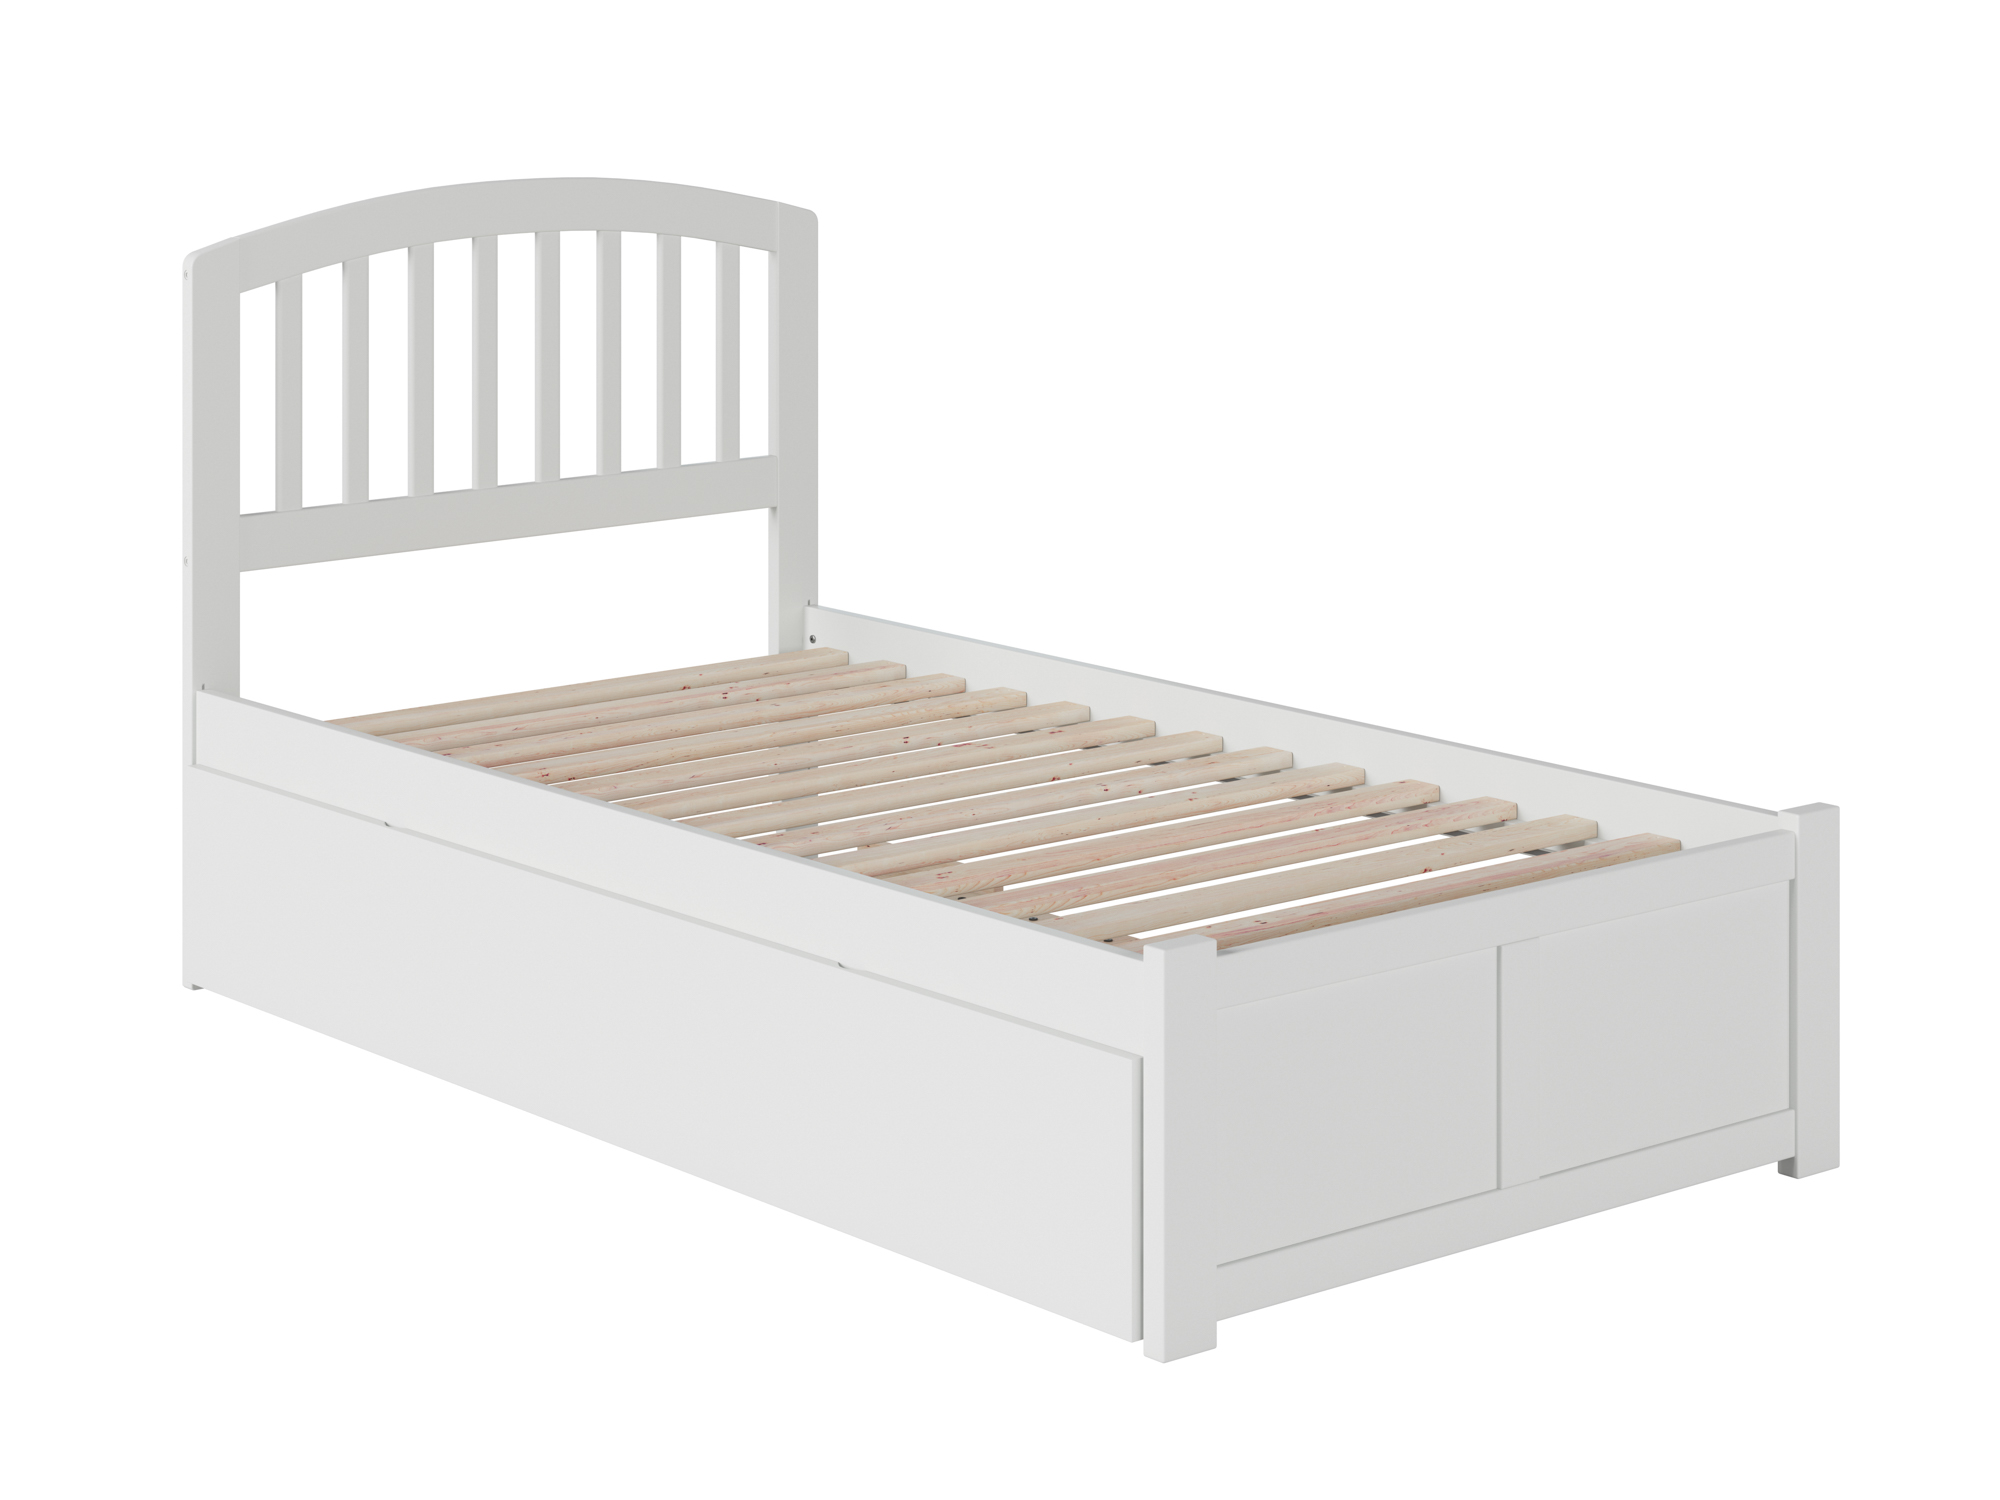 AFI Richmond Twin XL Solid Wood Bed with Twin XL Trundle in White - image 1 of 7